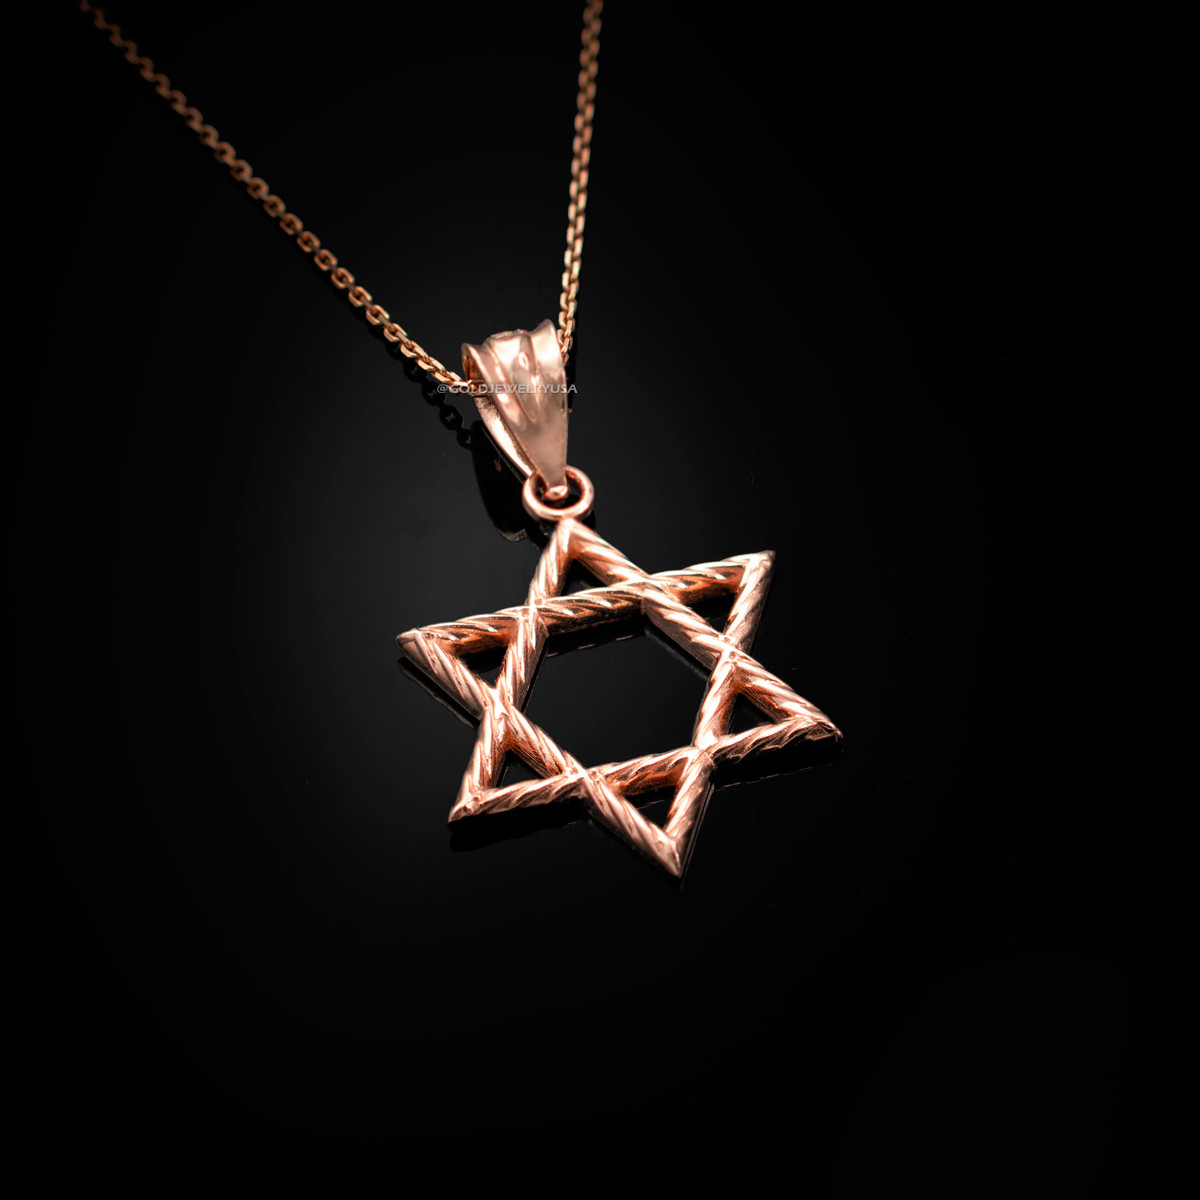 Jewish Star Necklace Women Men Jewelry 2016 New Trendy Gold Plated  Stainless Steel Vintage Star of David Pendant & Necklace P116 | Wish | Star  of david pendant, Jewish star necklace, Mens jewelry